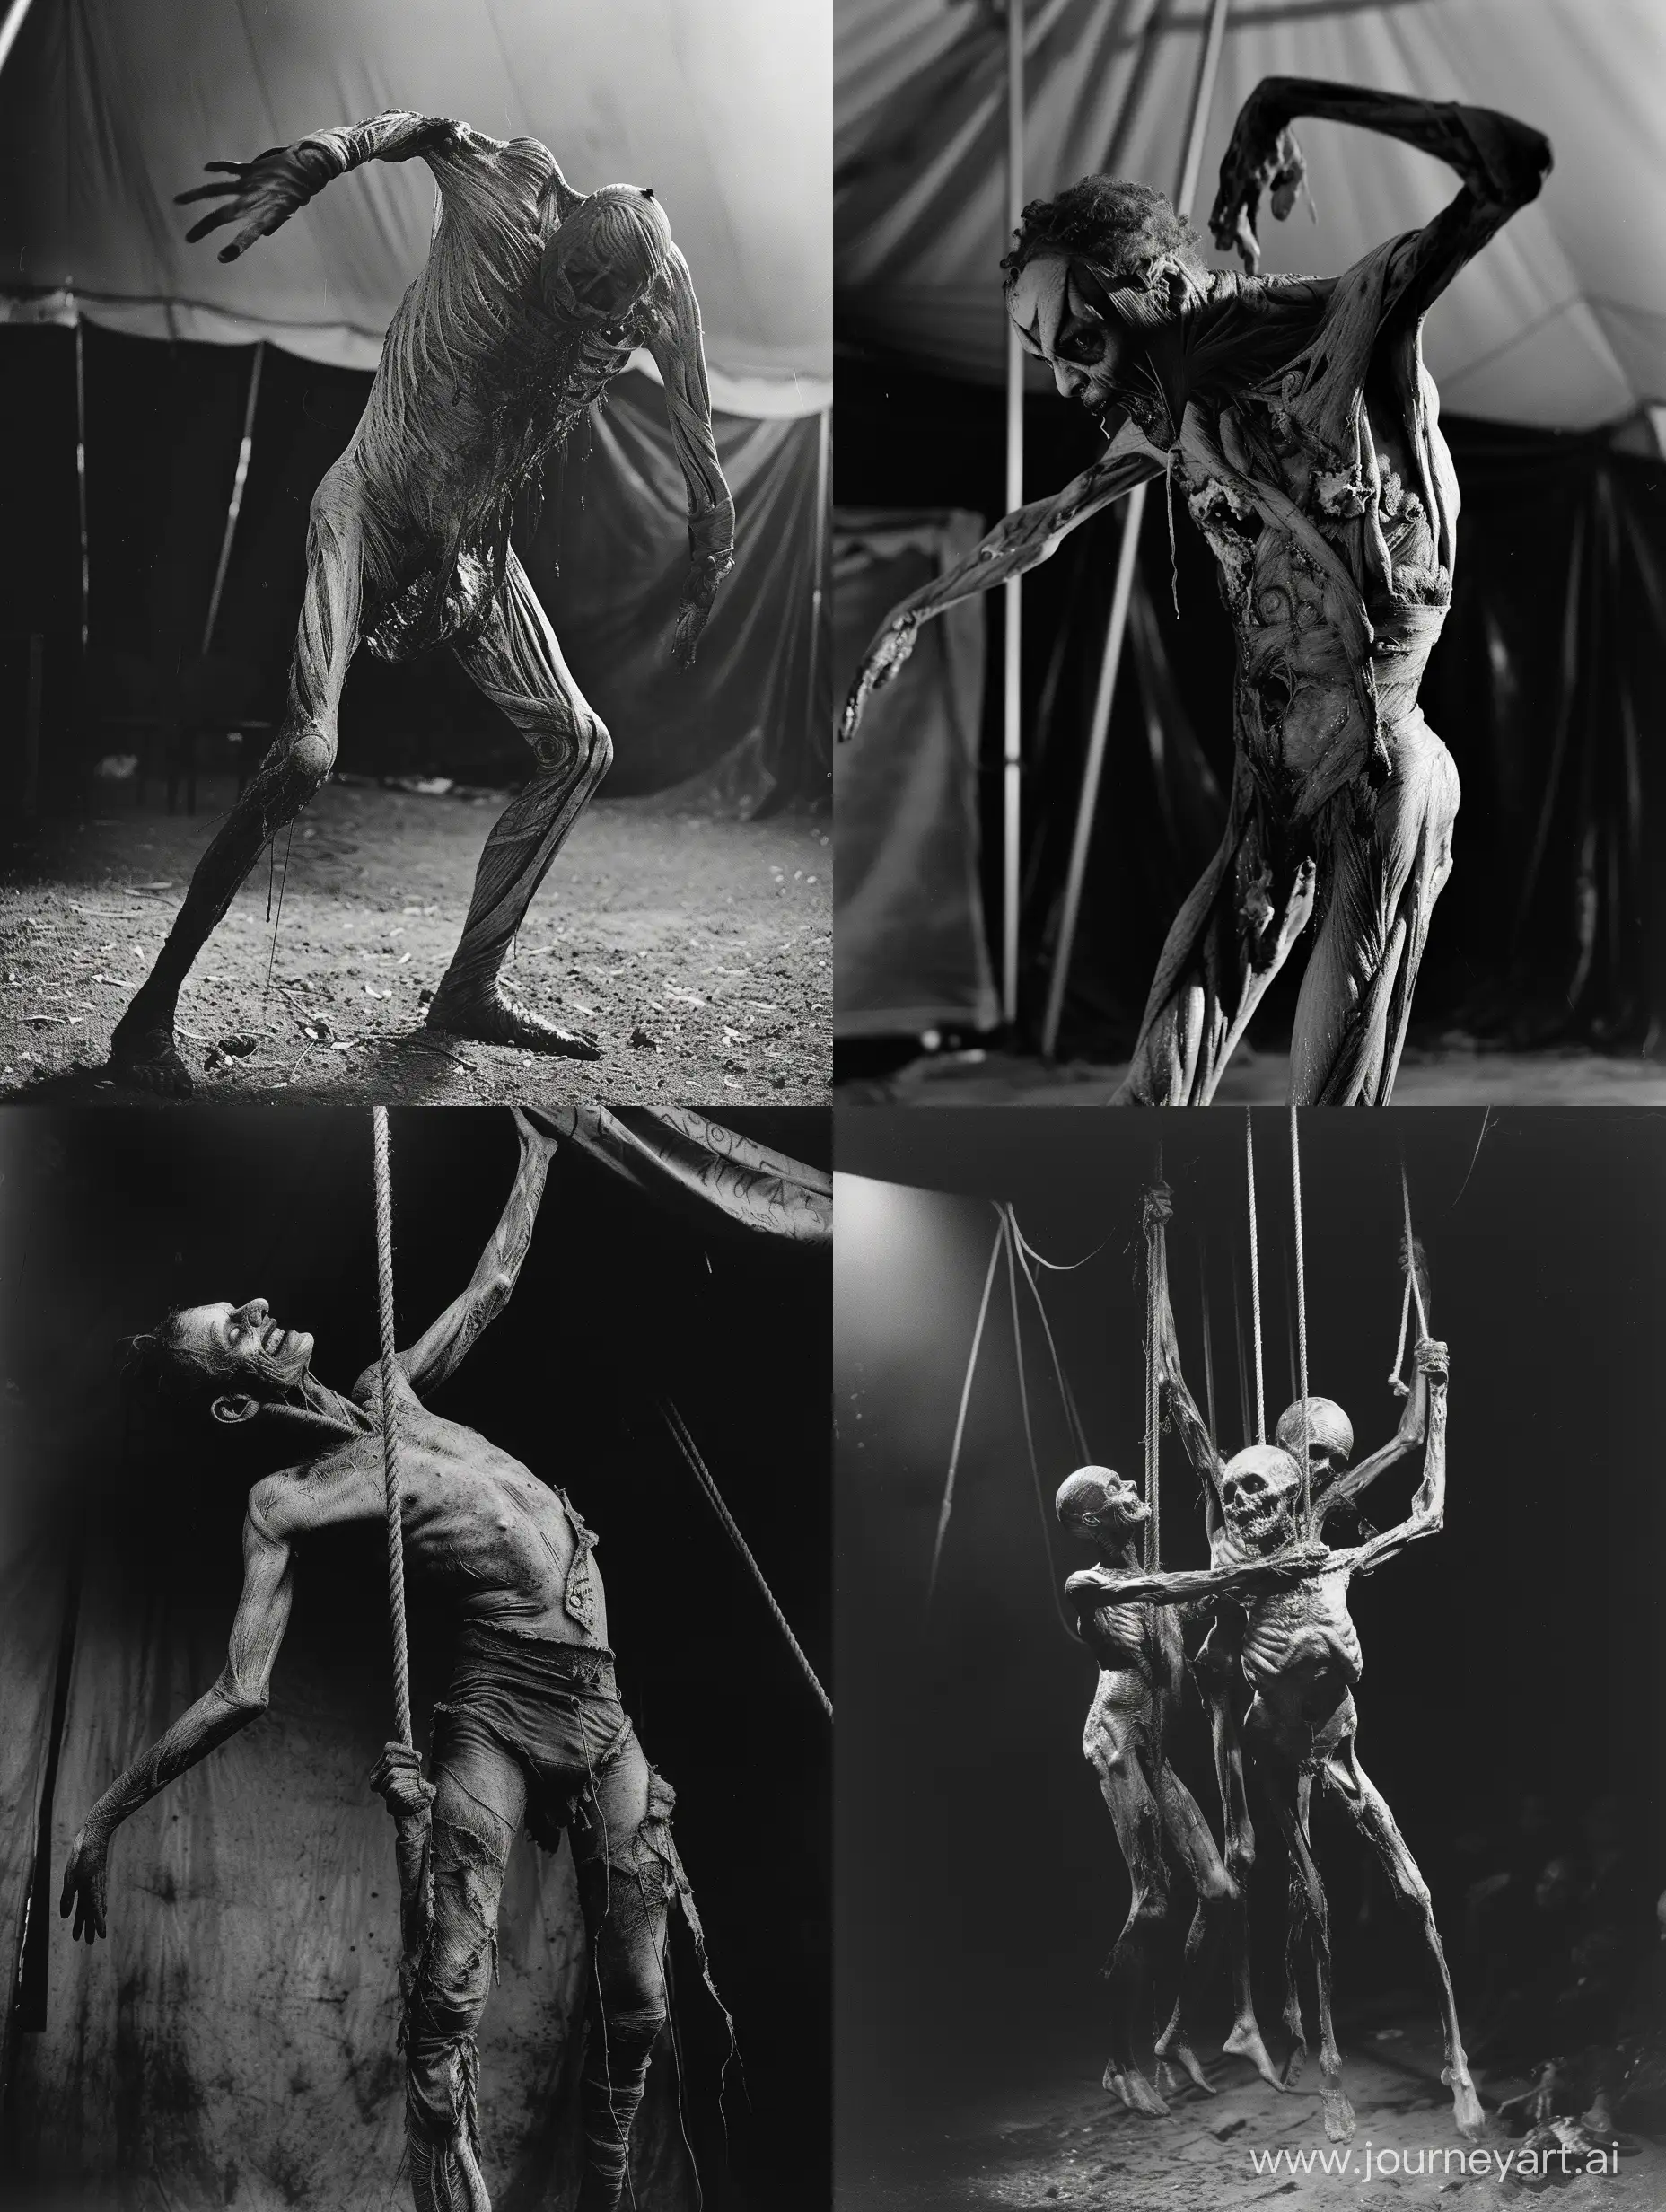 Grotesque-Body-Horror-Circus-Performers-in-Nightmarish-Monochrome-Spectacle